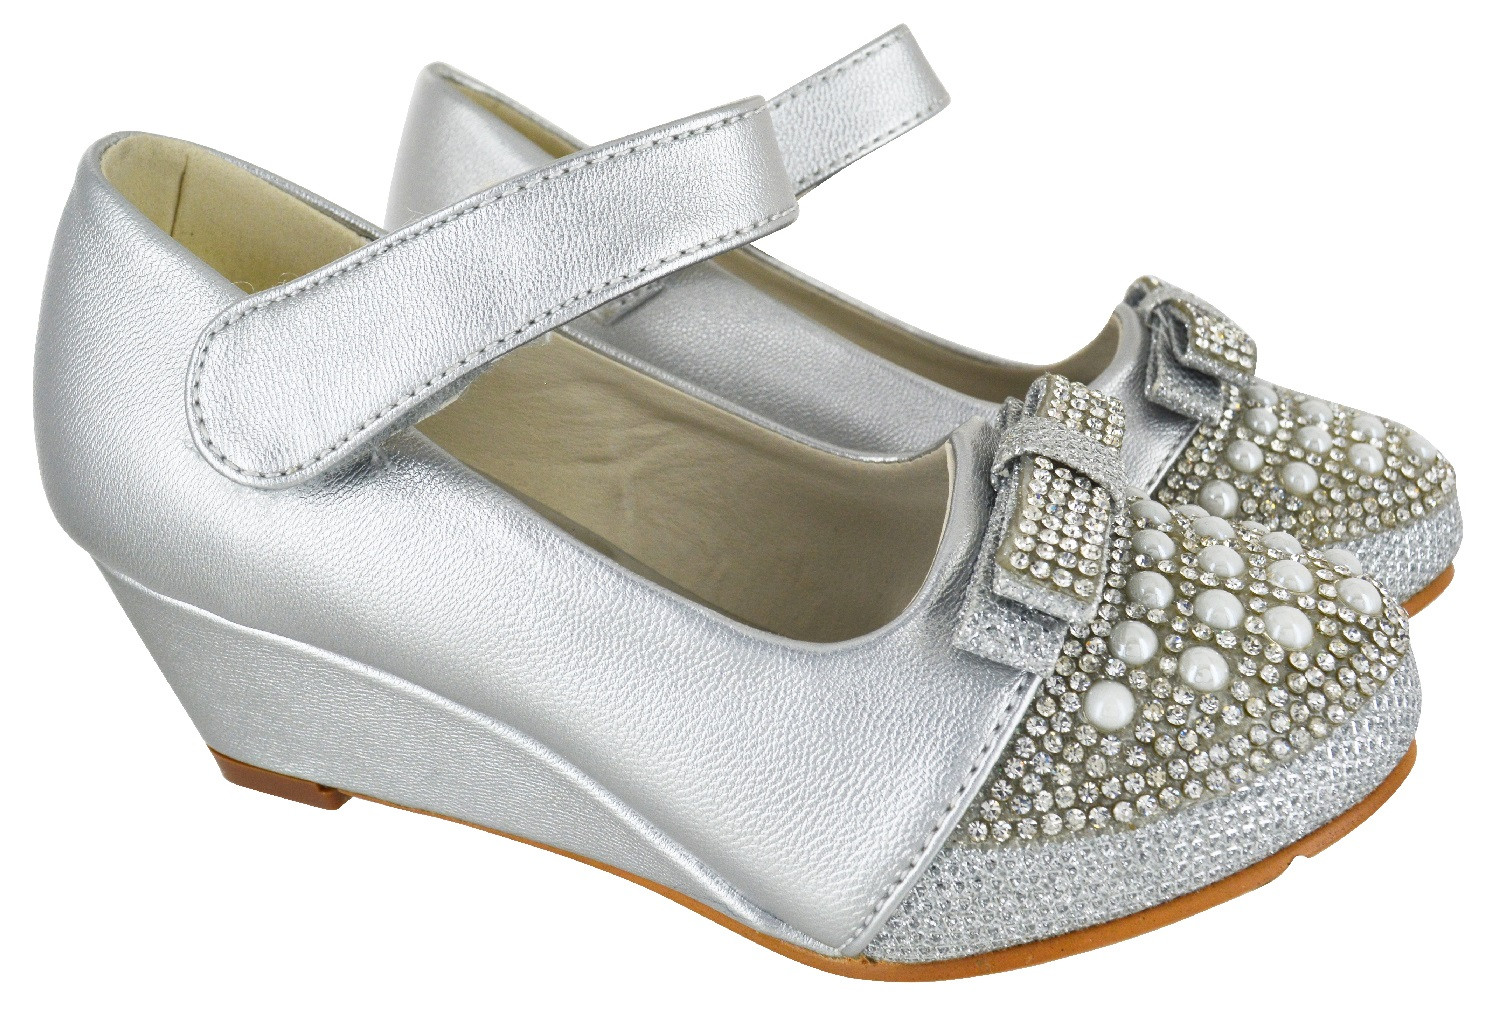 Silver Wedge Shoes For Wedding
 KIDS GIRLS SILVER MID HEEL WEDGE PARTY CHILDREN BRIDEMAID